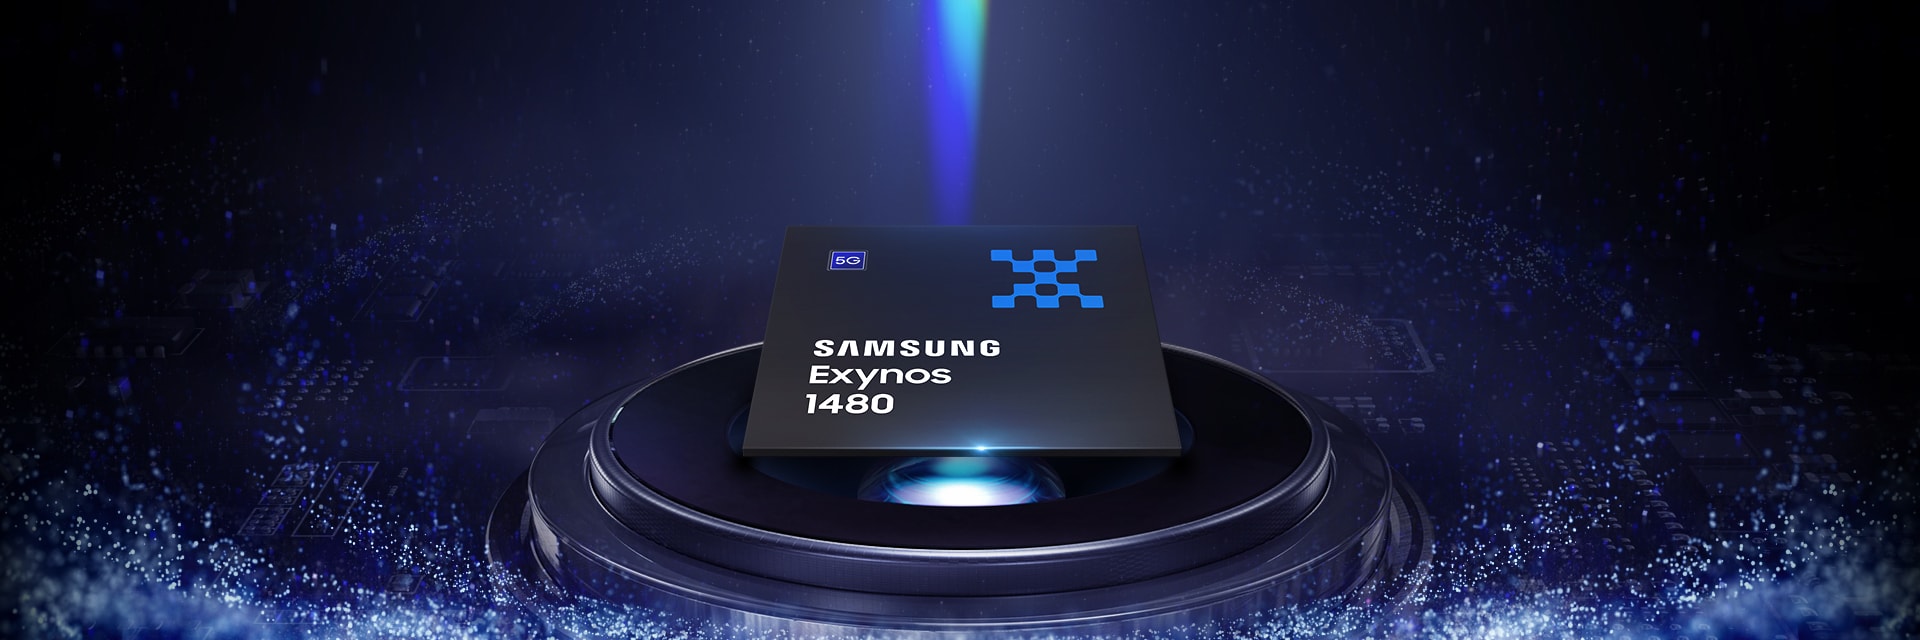 The Samsung Exynos 1480 enhances the mobile experience with advanced AI imaging technology and support for 200MP image sensors.